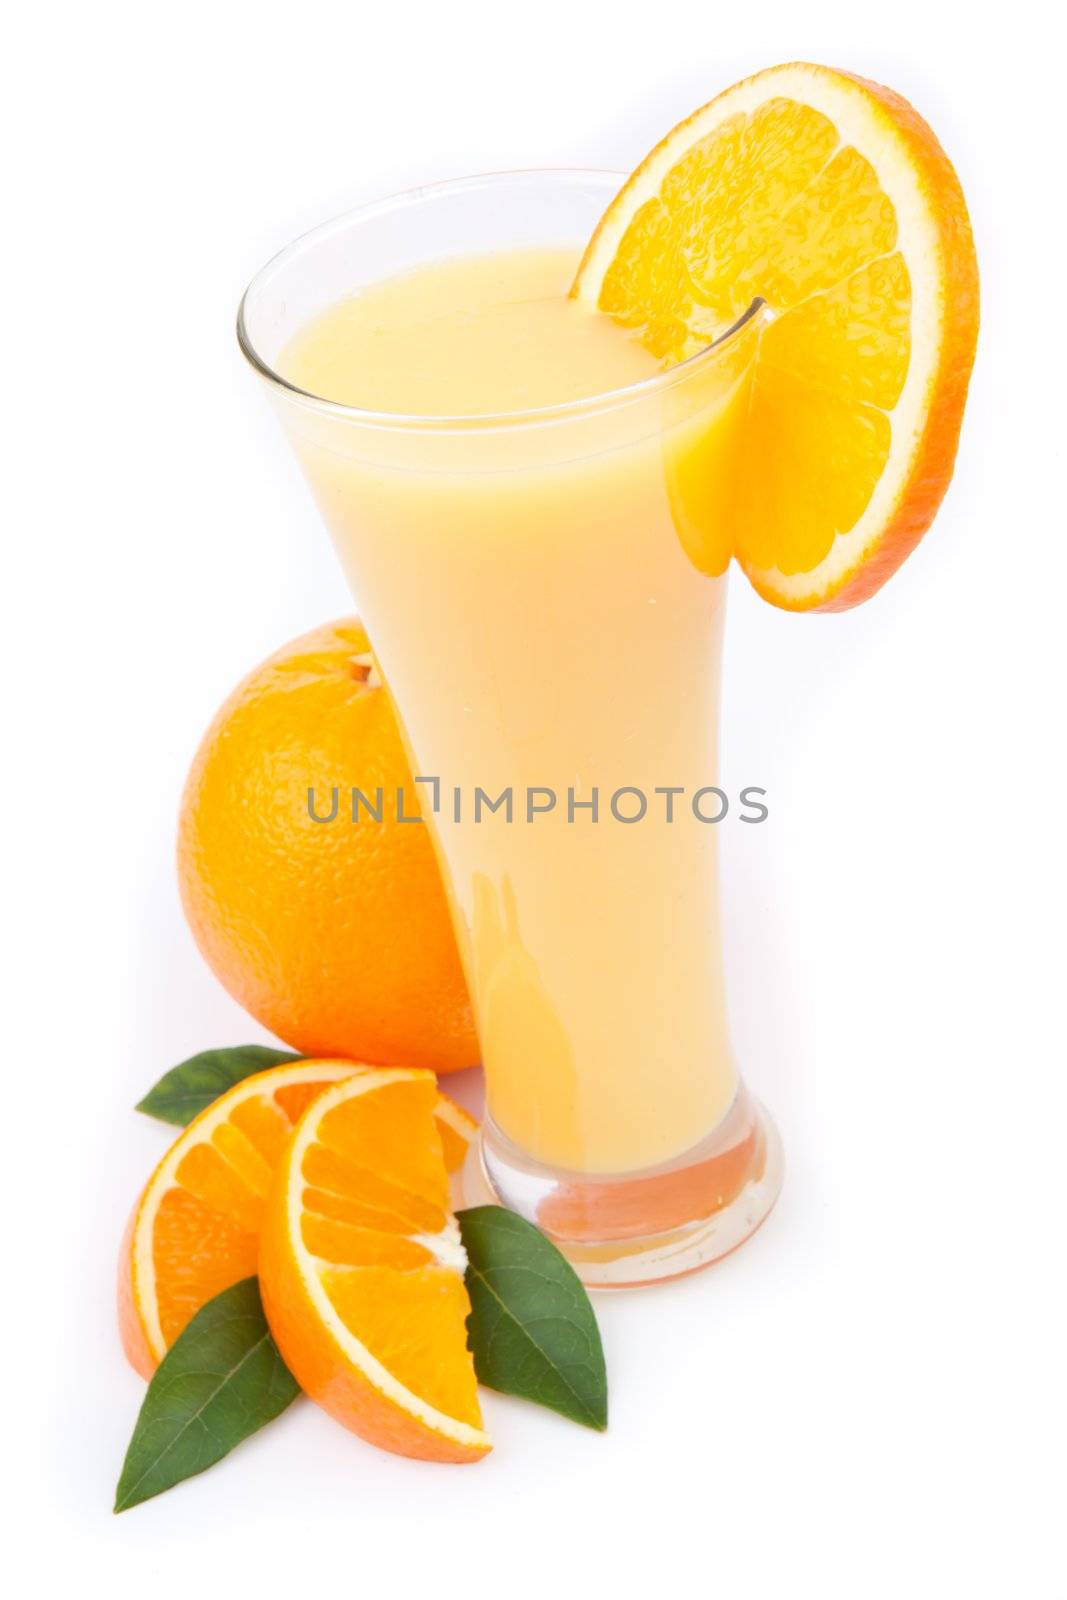 Orange juice ready to drink against a white background